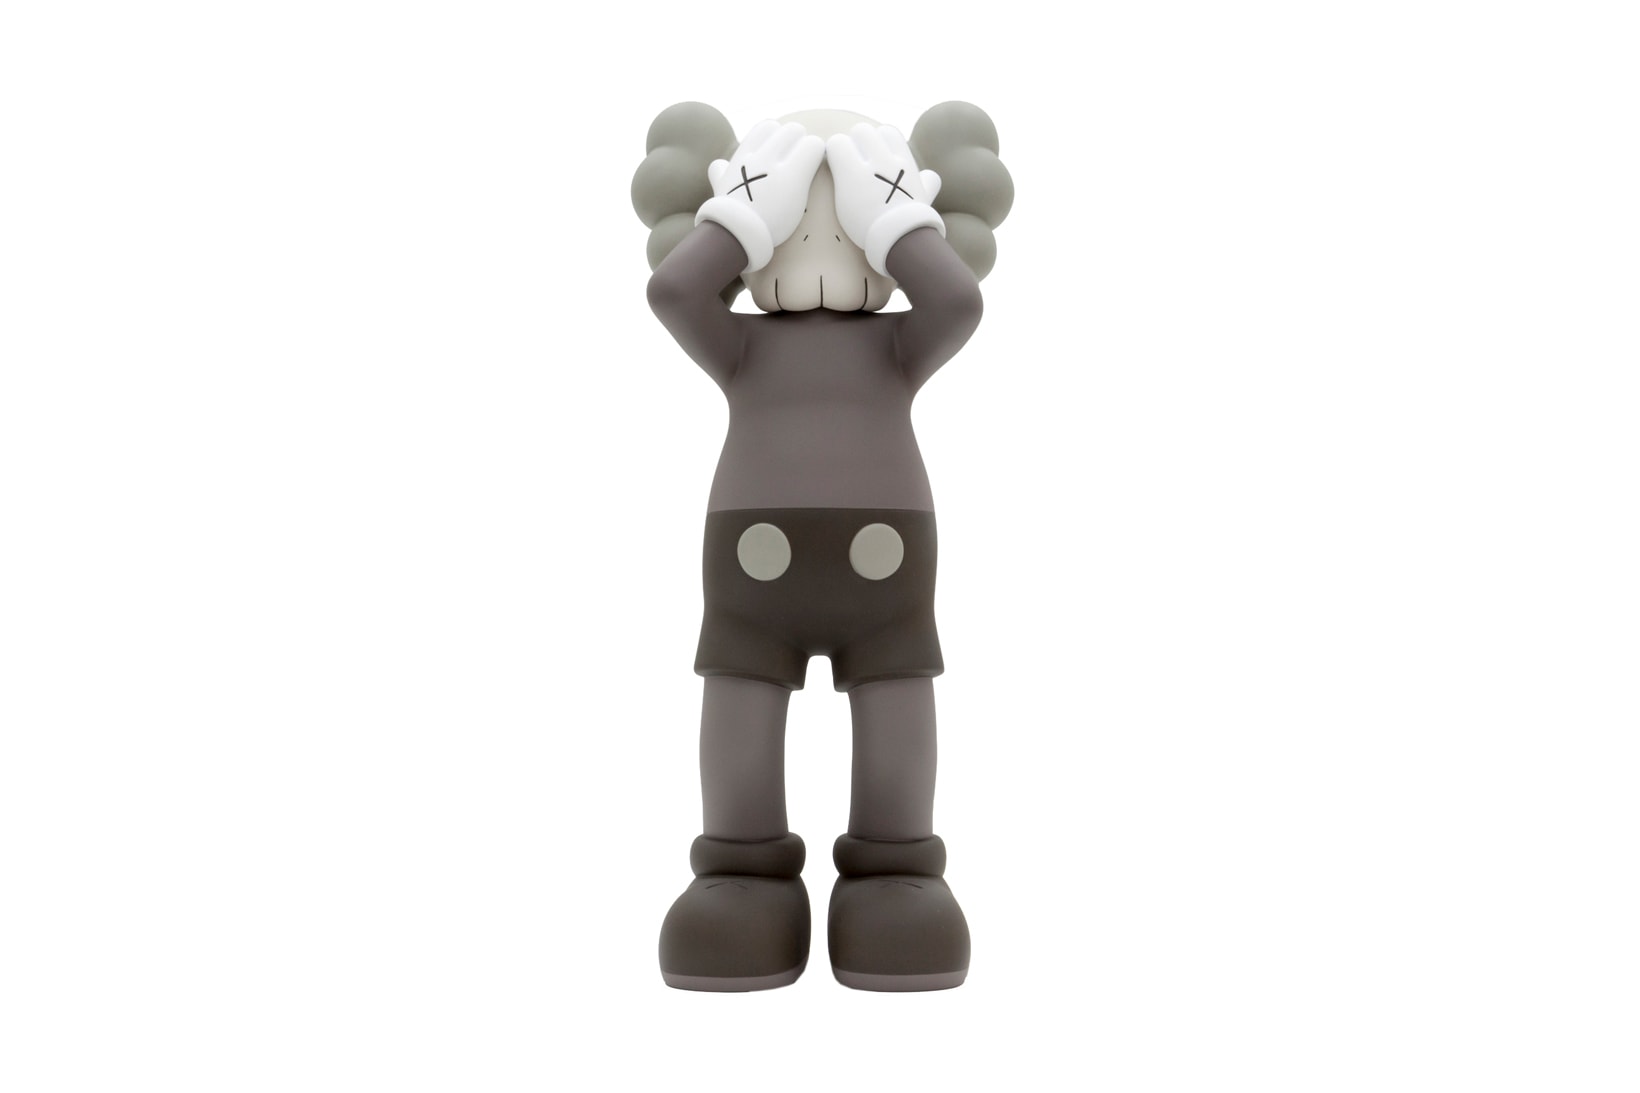 KAWS At This Time Bronze Companion Sculpture Andy Warhol Museum Paddle8 Auction